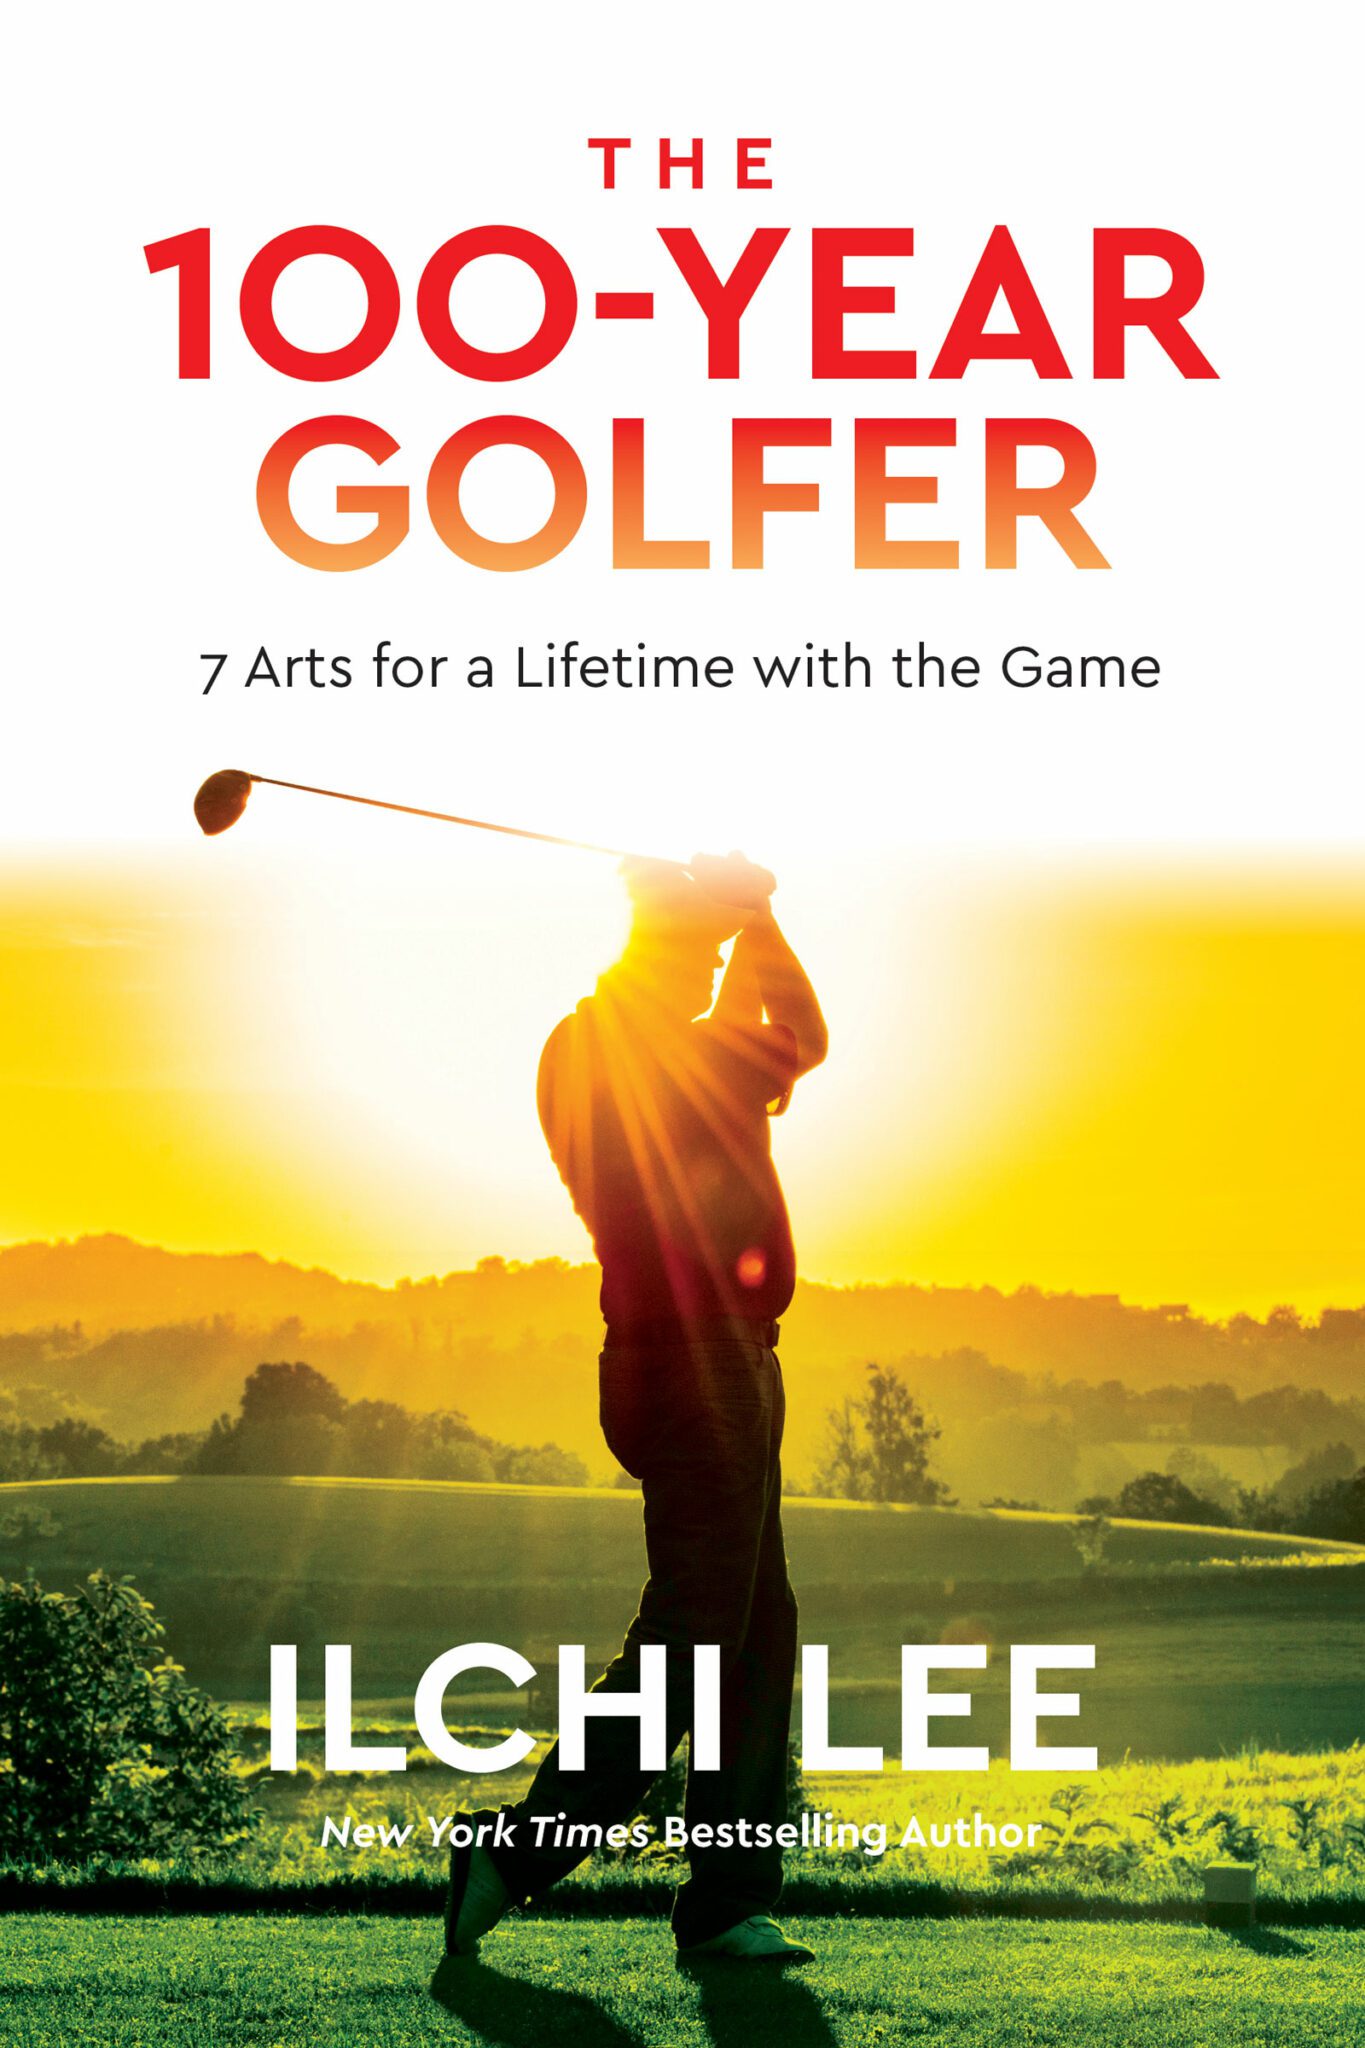 The 100-Year Golfer book by Ilchi Lee